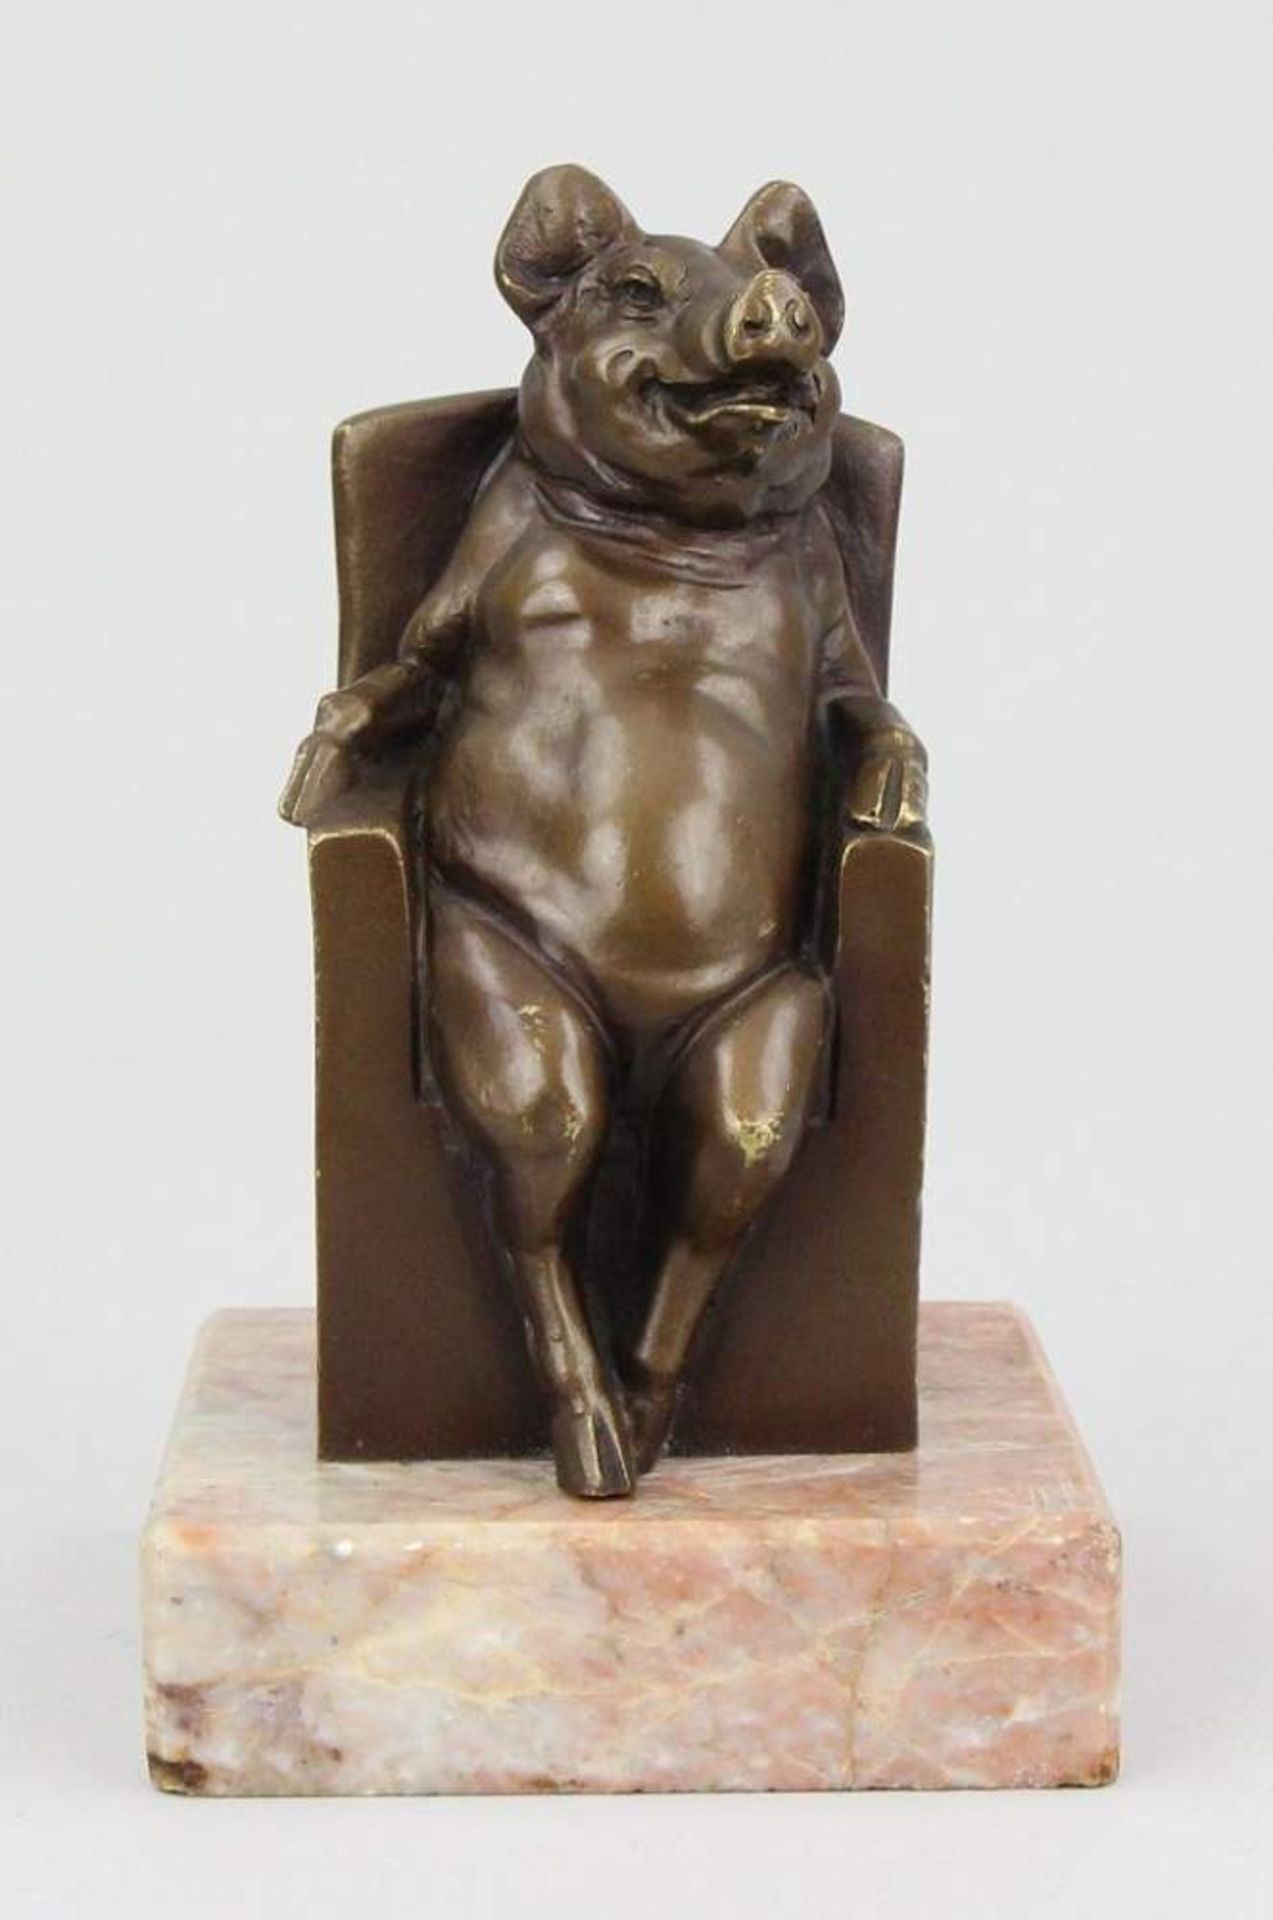 19th century Austrian sculptor Figure, patinated bronze, sitting pig, signed on the side "DEPOSEE